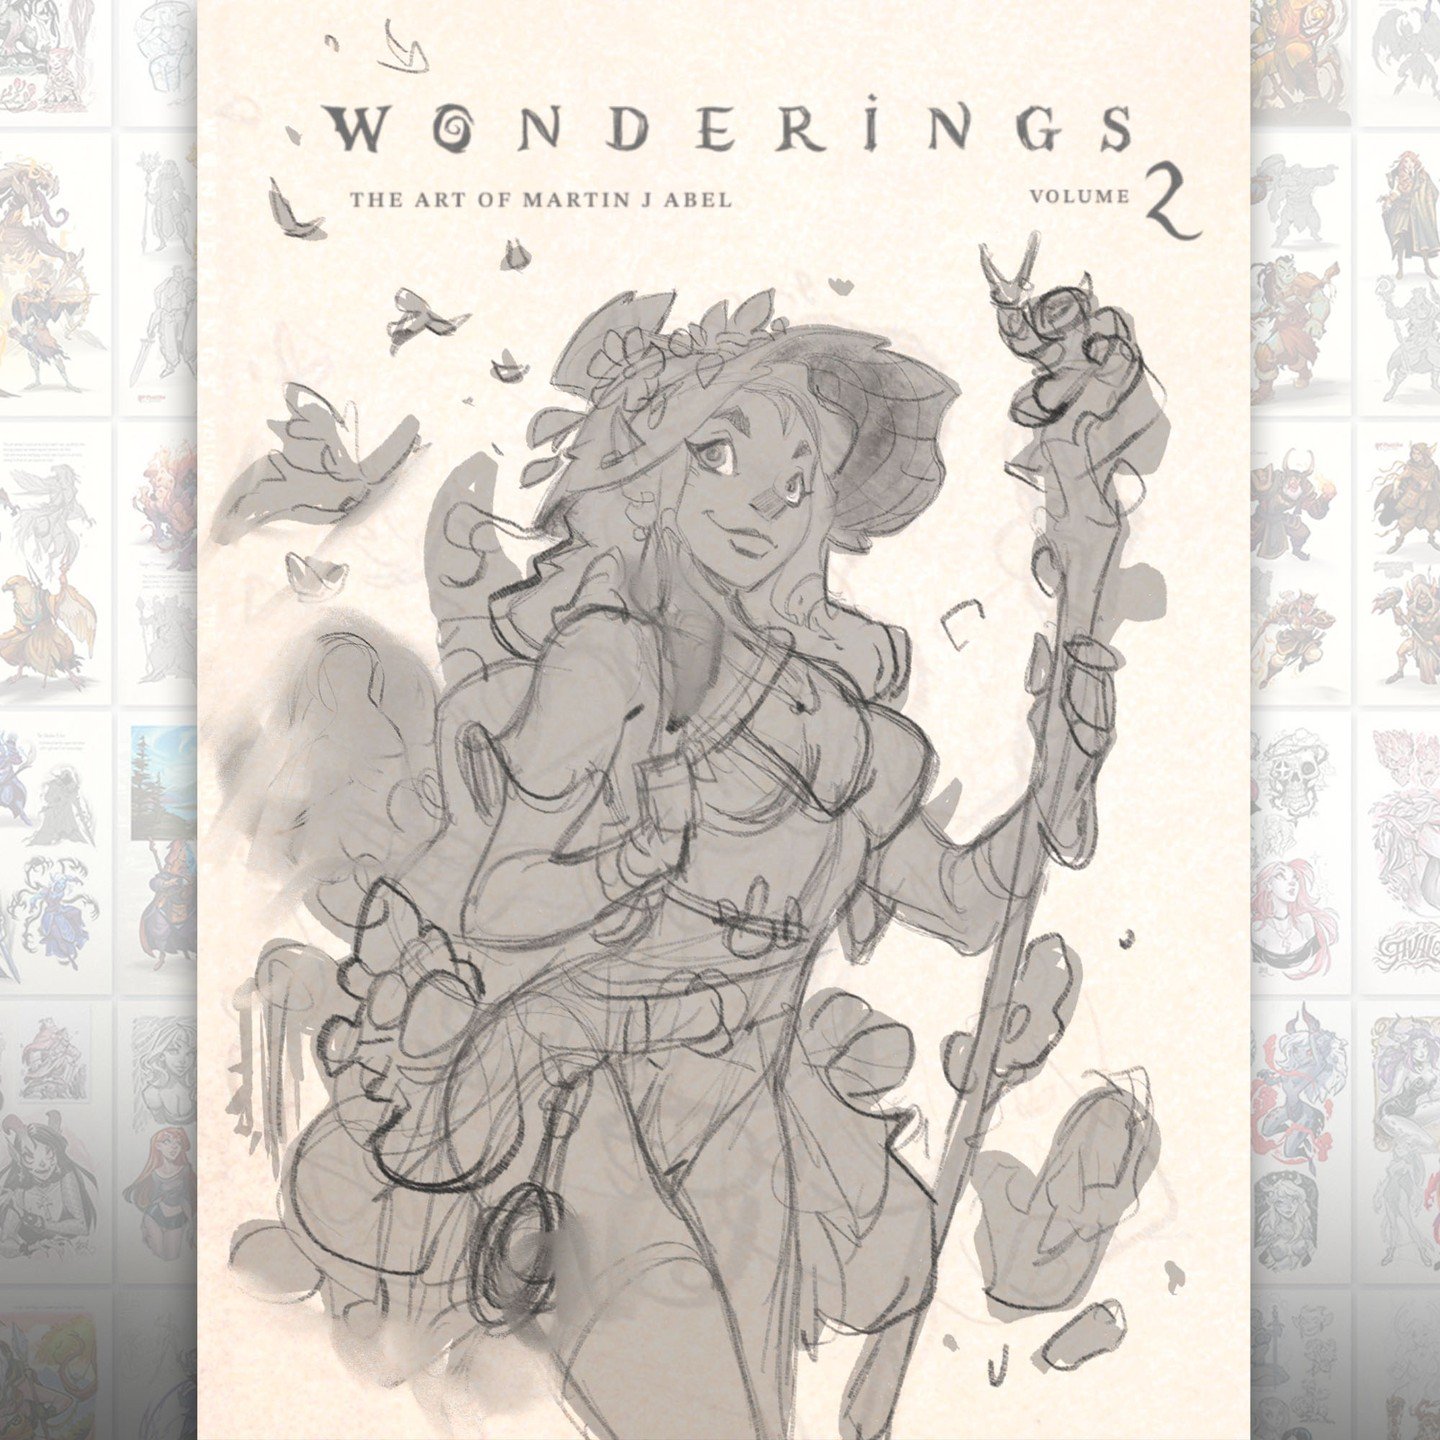 🌟 Only 7 days left to back the Kickstarter for Wonderings Volume 2! 🌟

✨ Featured in this post is the original sketch for the cover art, of Aura Wildwood the magical herbalist and forager - who is currently the featured character in my #wonderings2